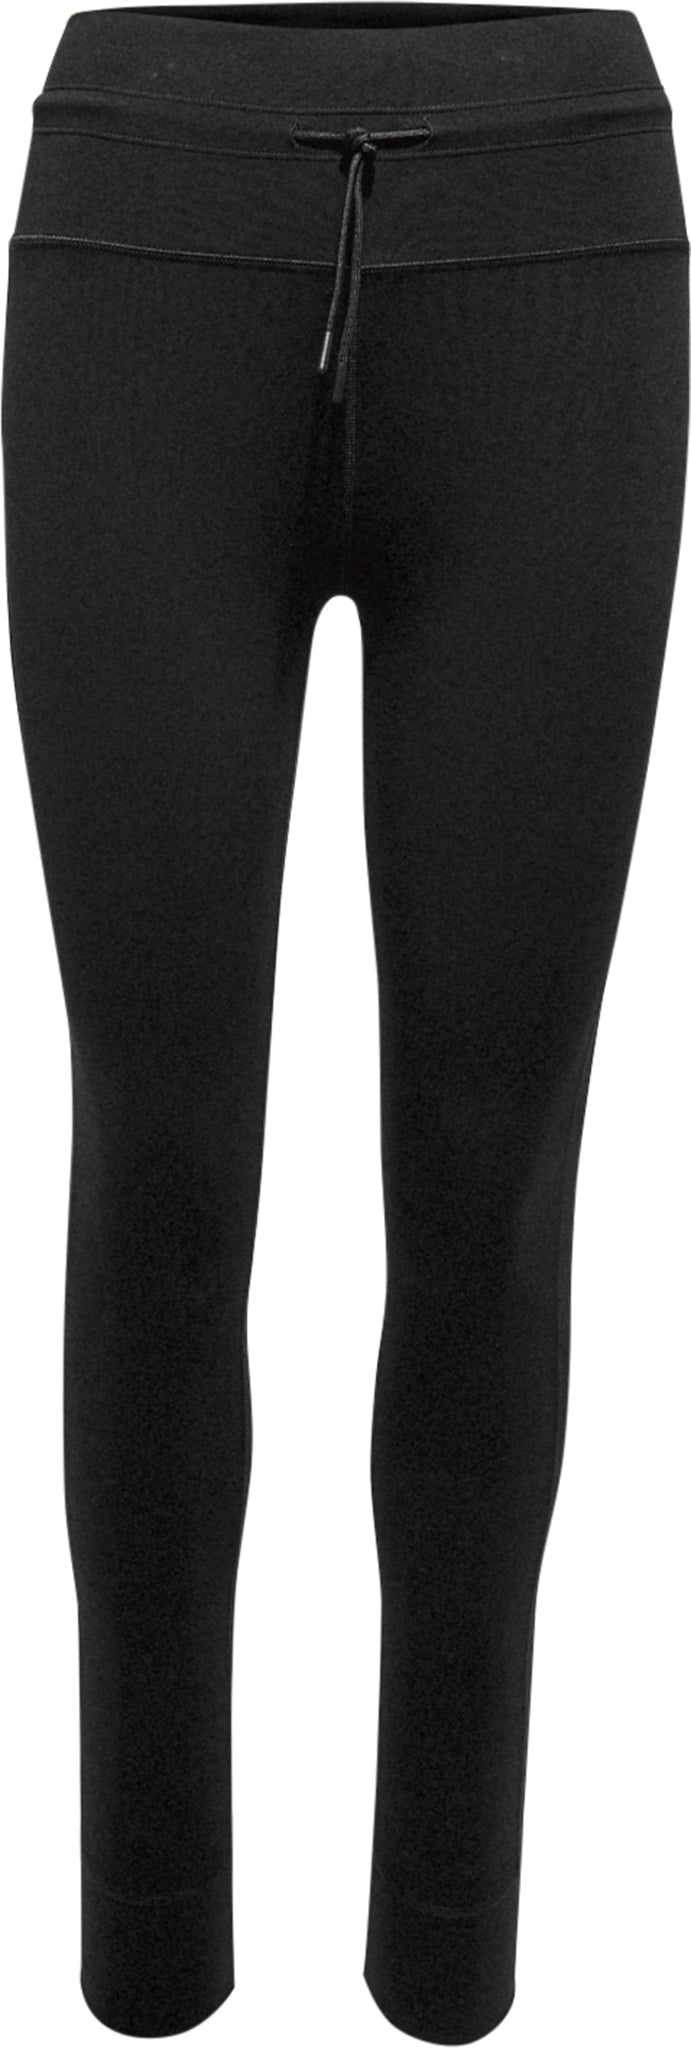 Women's Leggings With Double Layer 5 Hi-Waistband